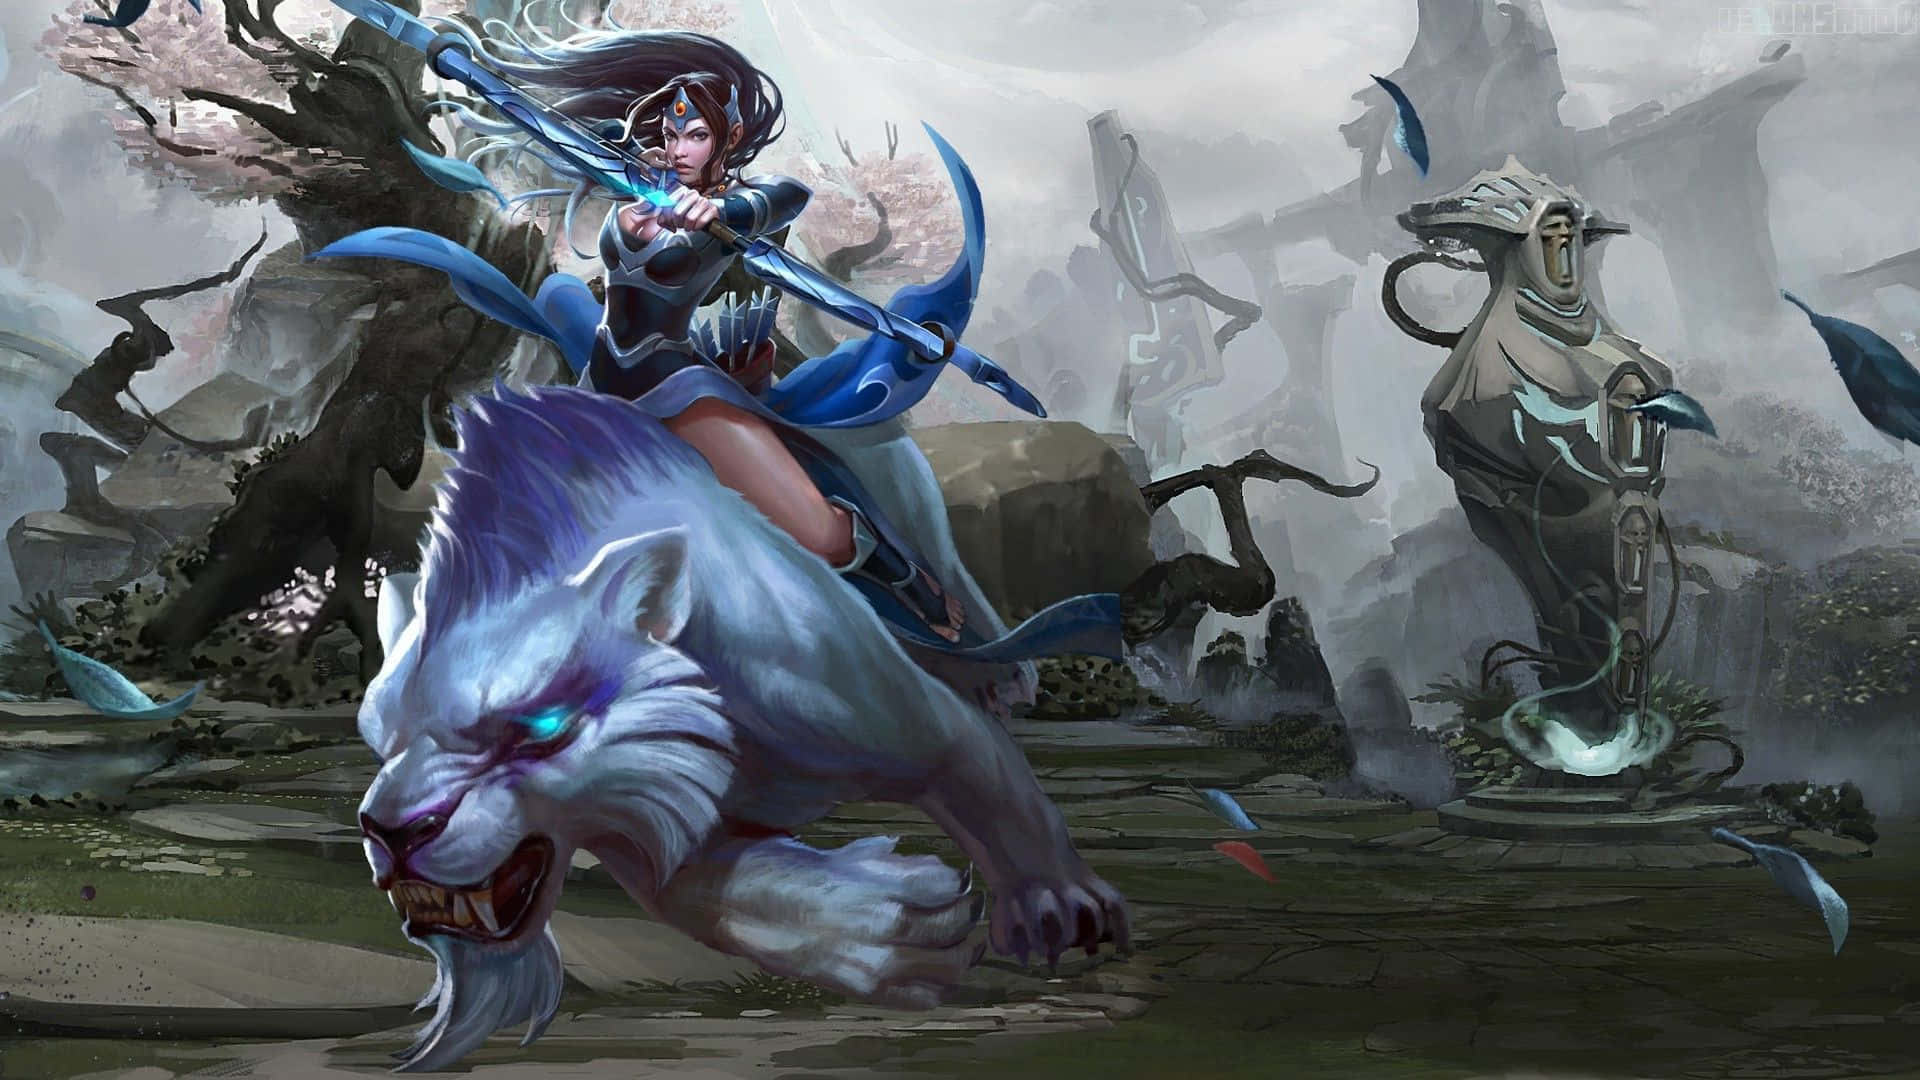 Caption: Mirana, the Princess of the Moon in battle action Wallpaper